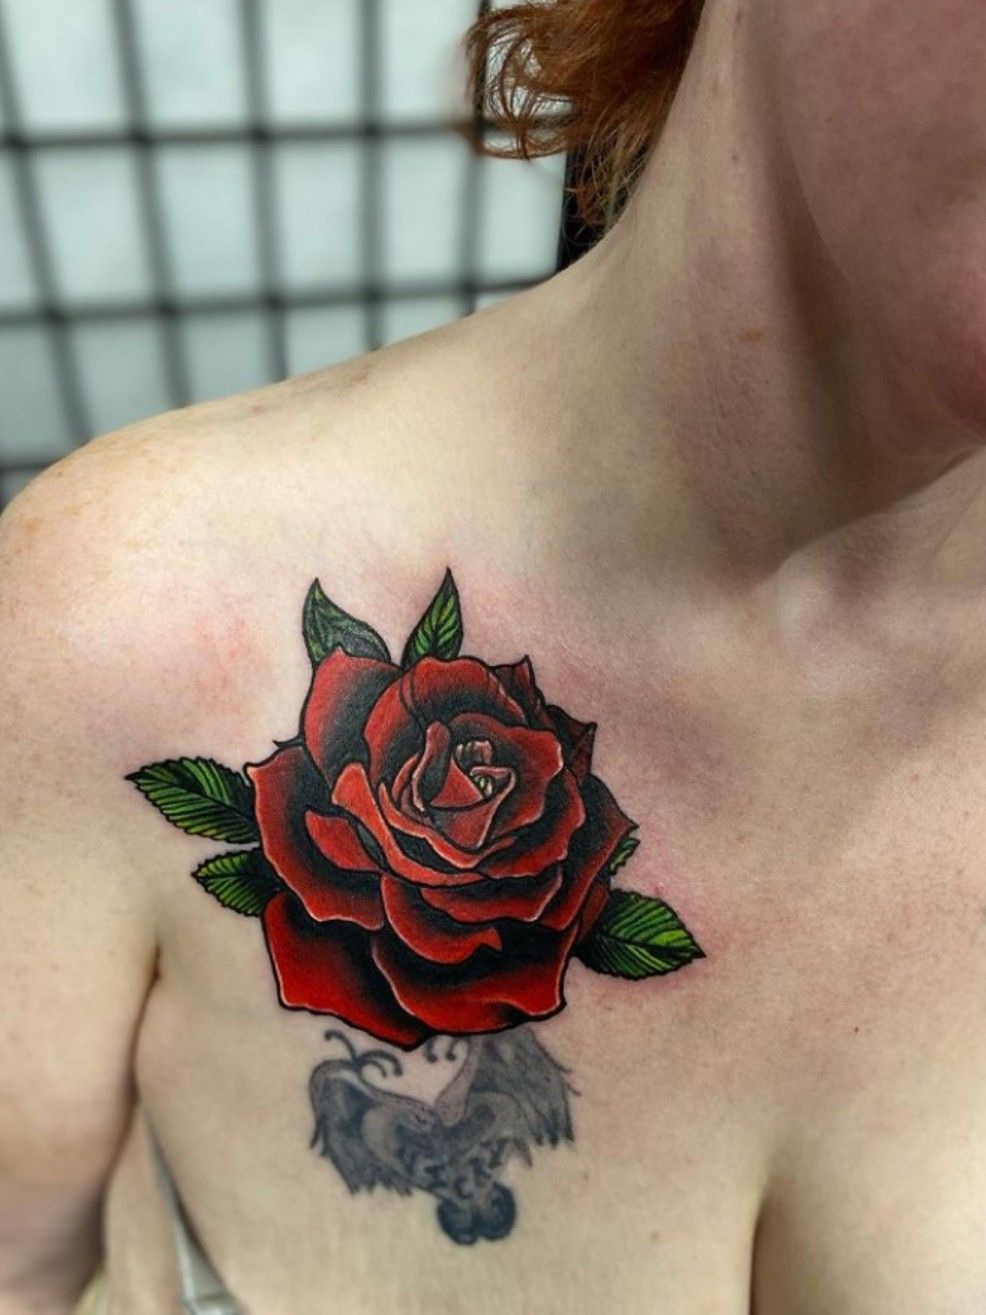 Soul of Tattoo  Rose tattoo on hand its just cover up  Facebook